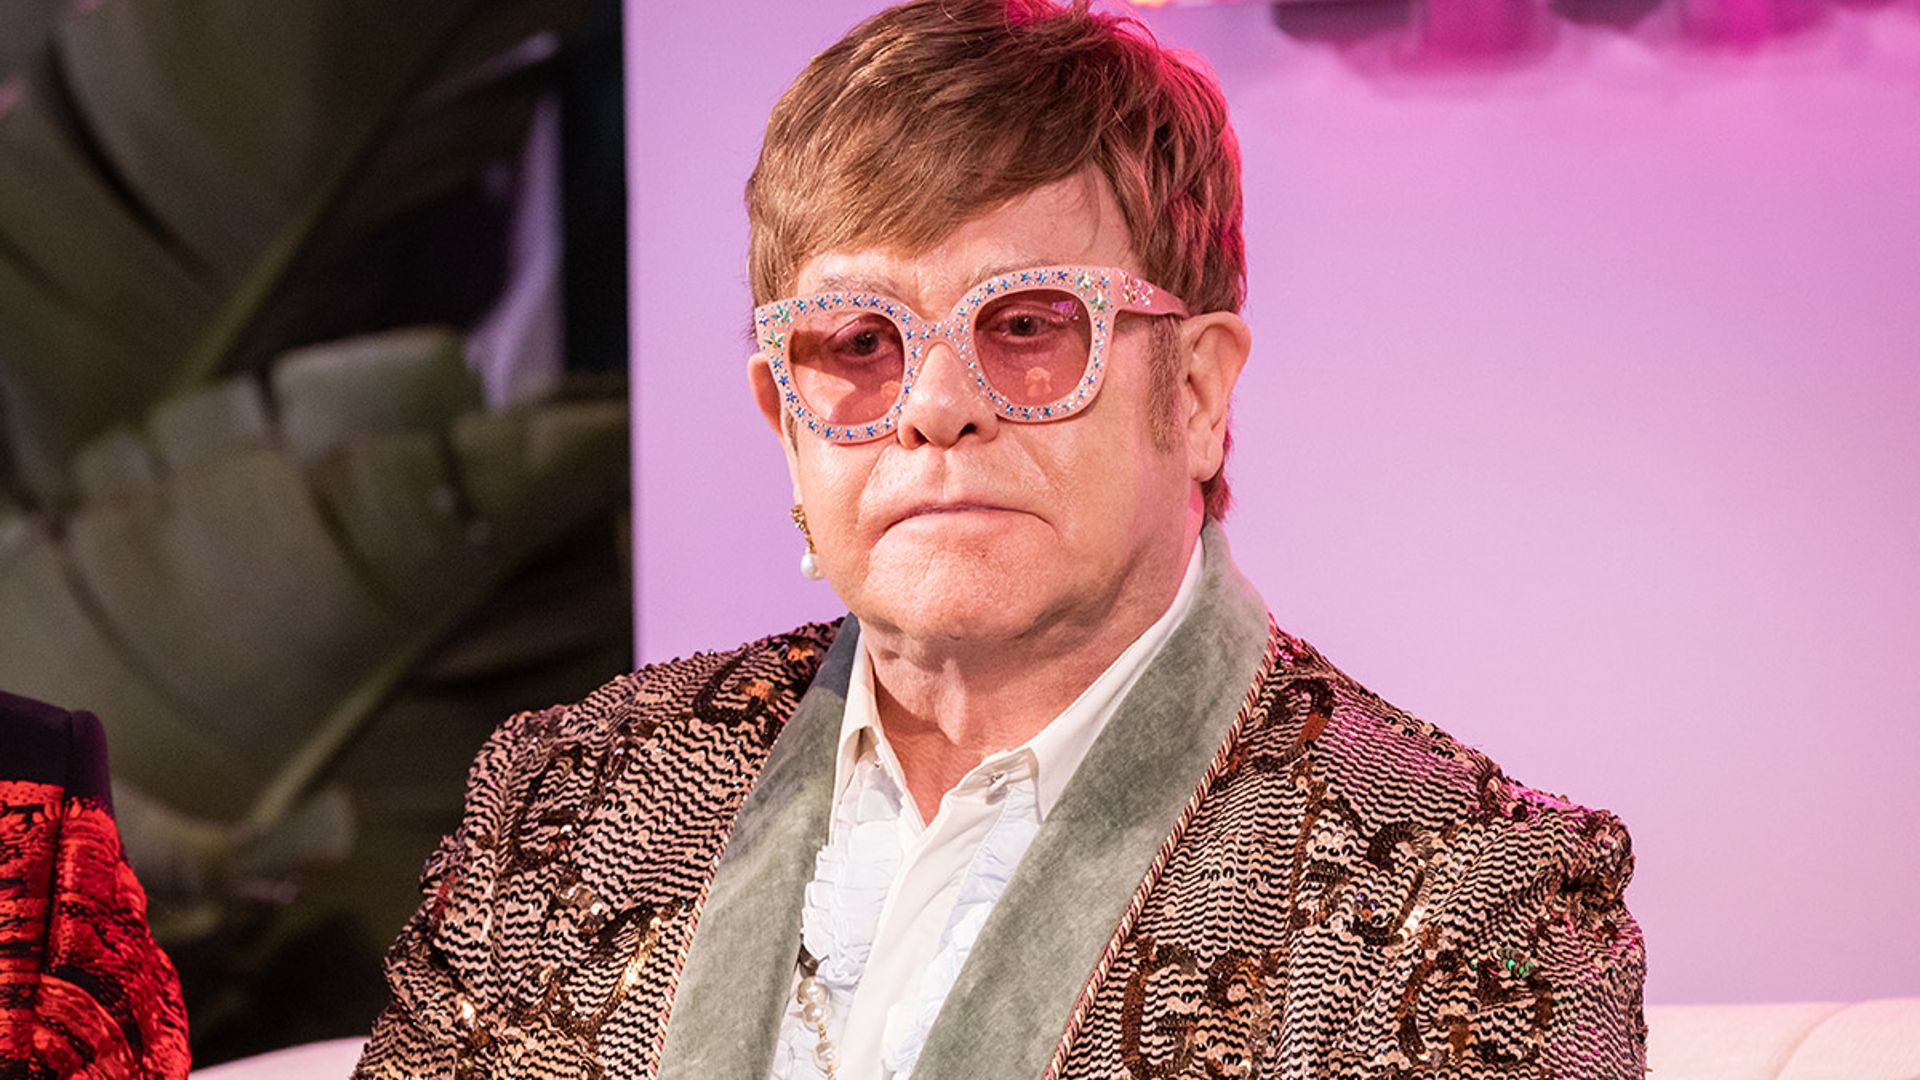 Elton John inundated with support as he mourns sad death ahead of Christmas